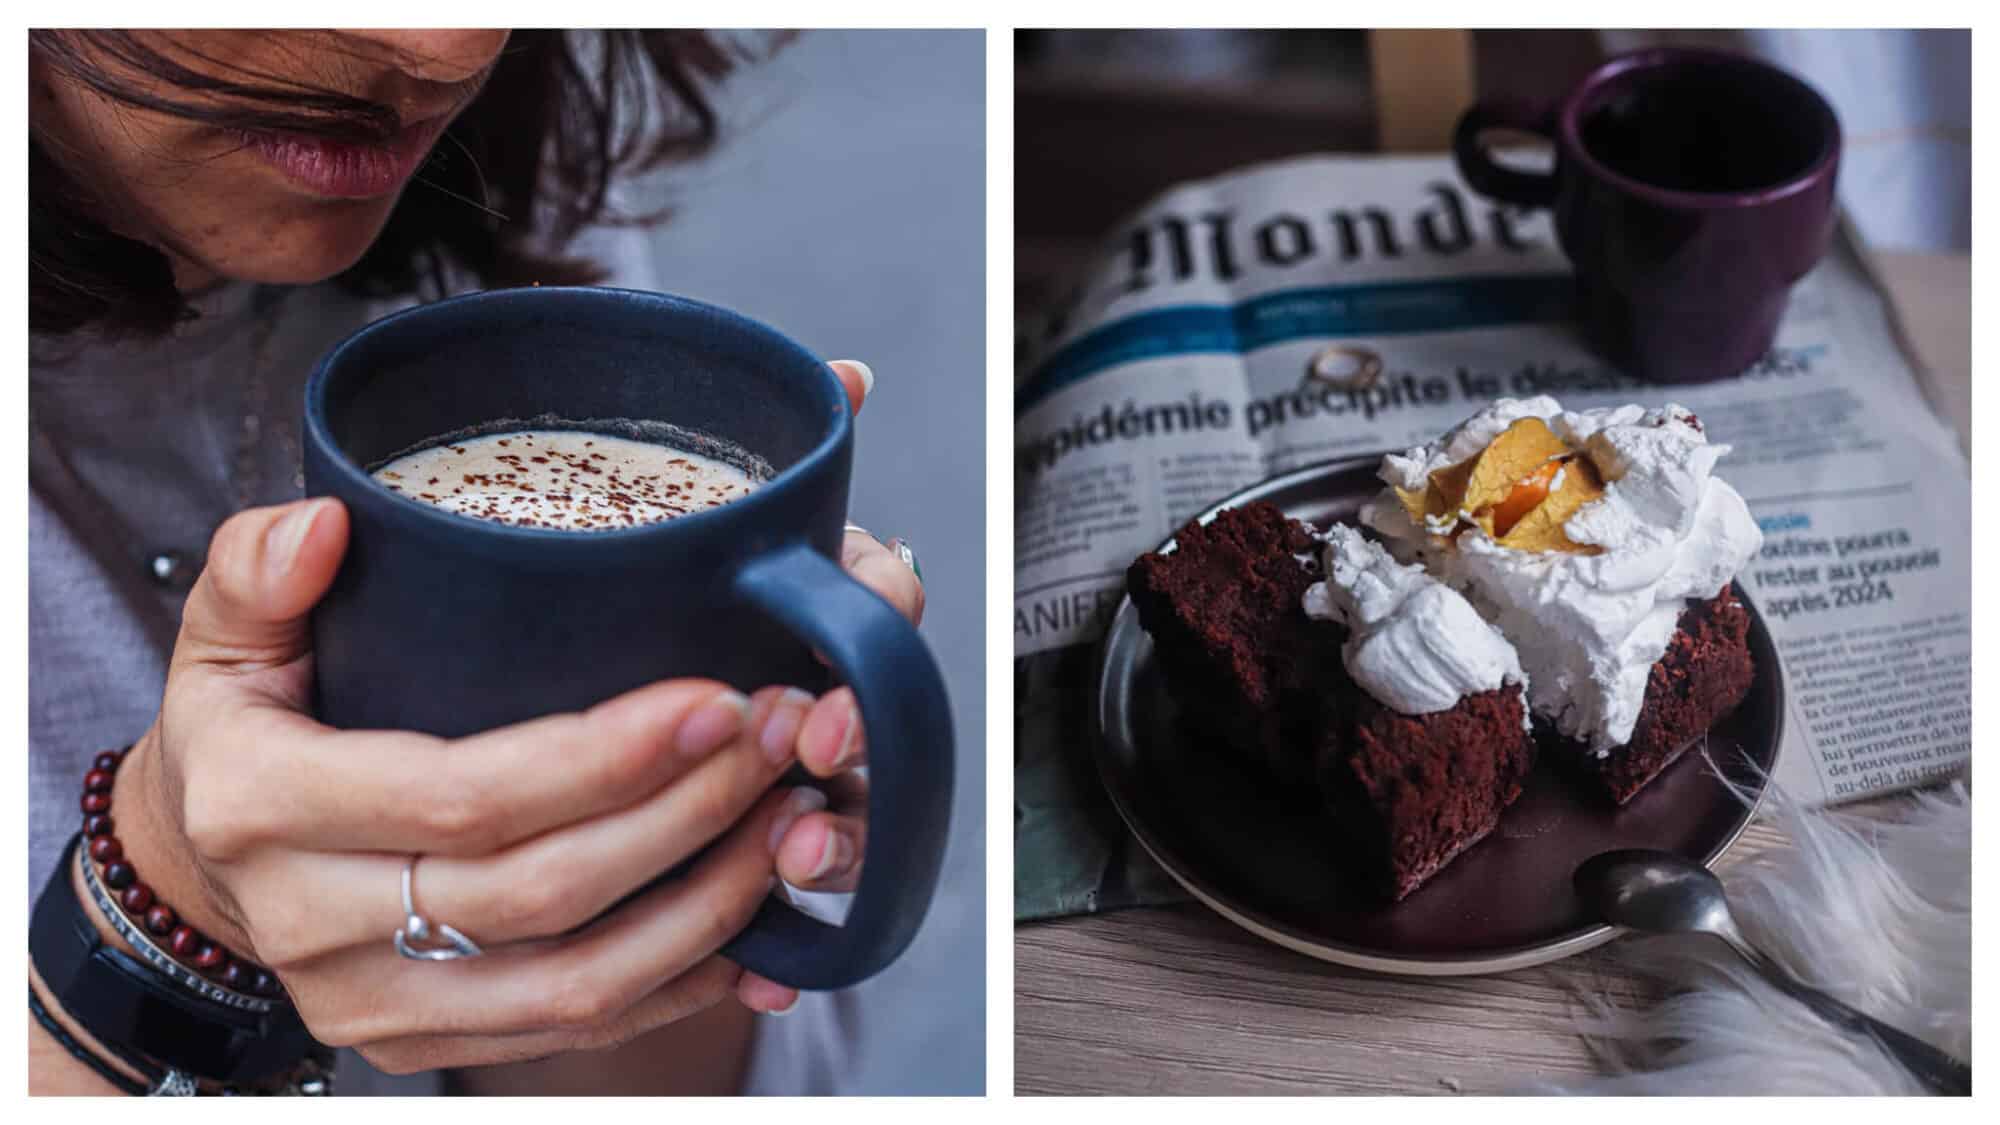 Left, a man holding a large cup of coffee. Right, a slice of chocolate cake with whipped cream and a Le Monde newspaper in the background on the table.